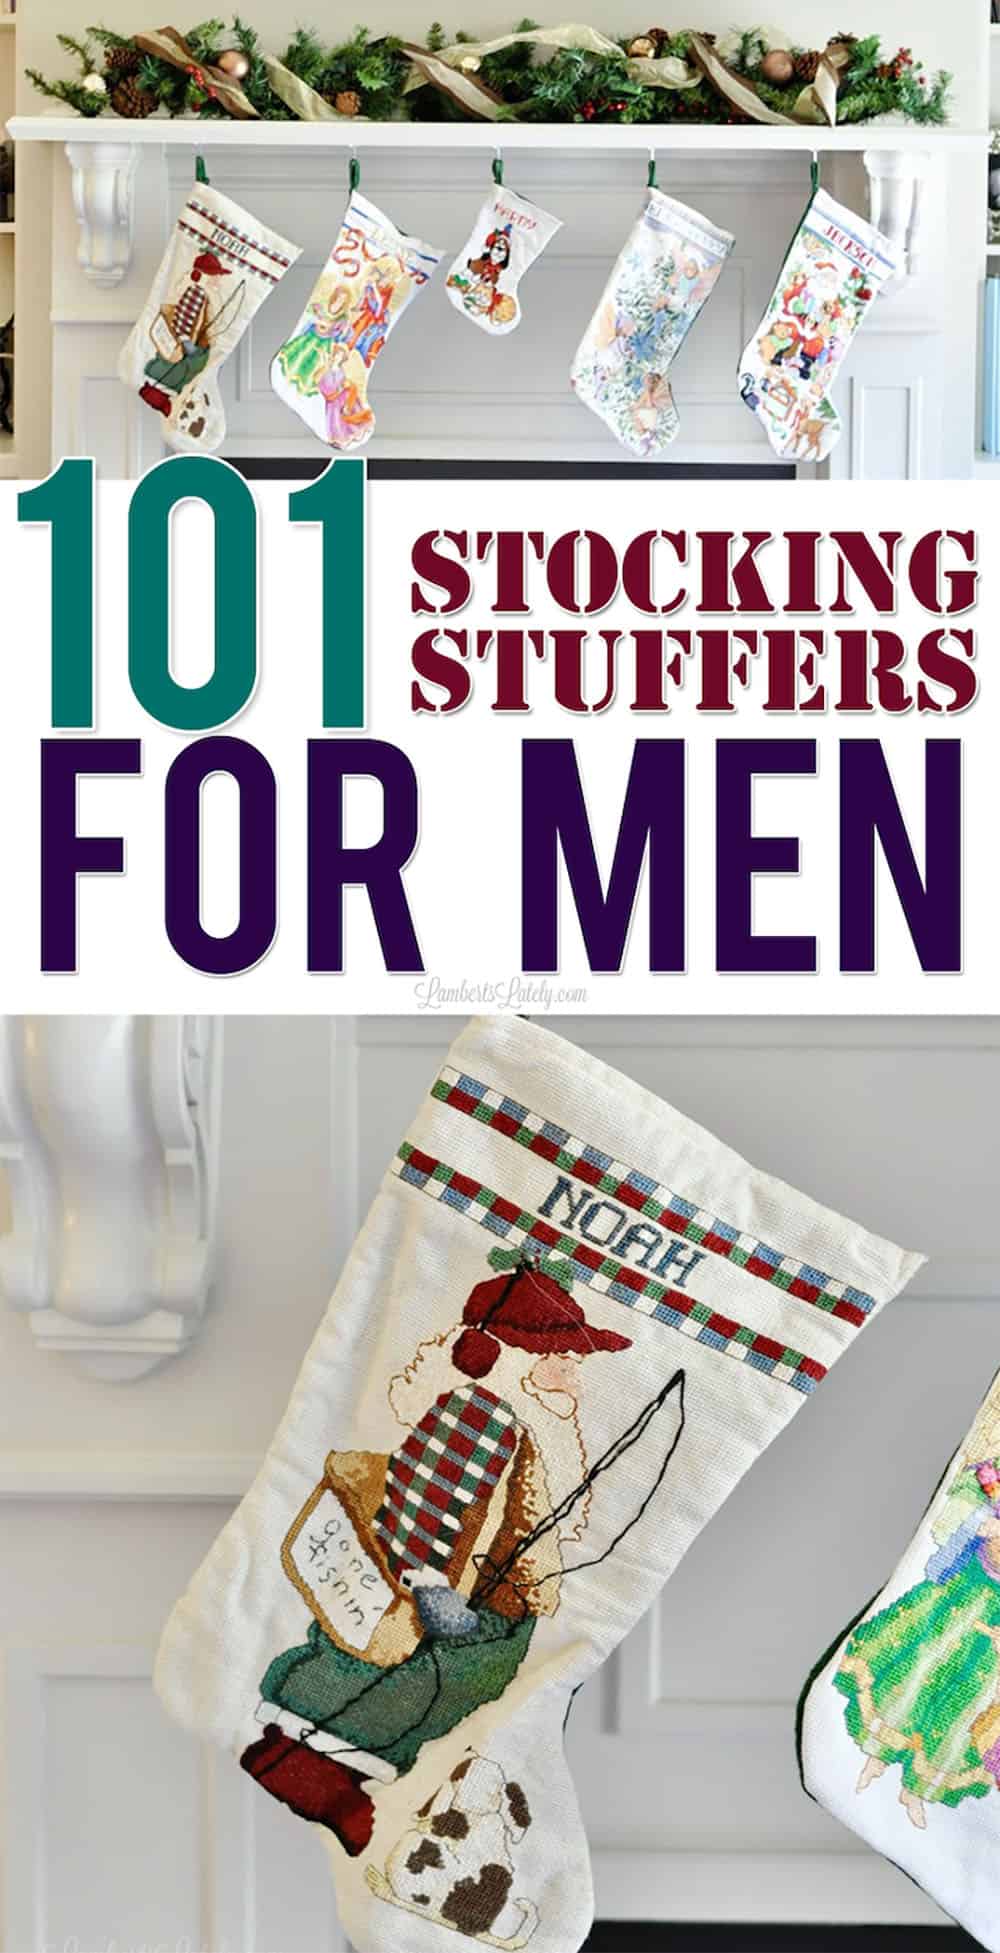 stocking stuffers for men - introduction